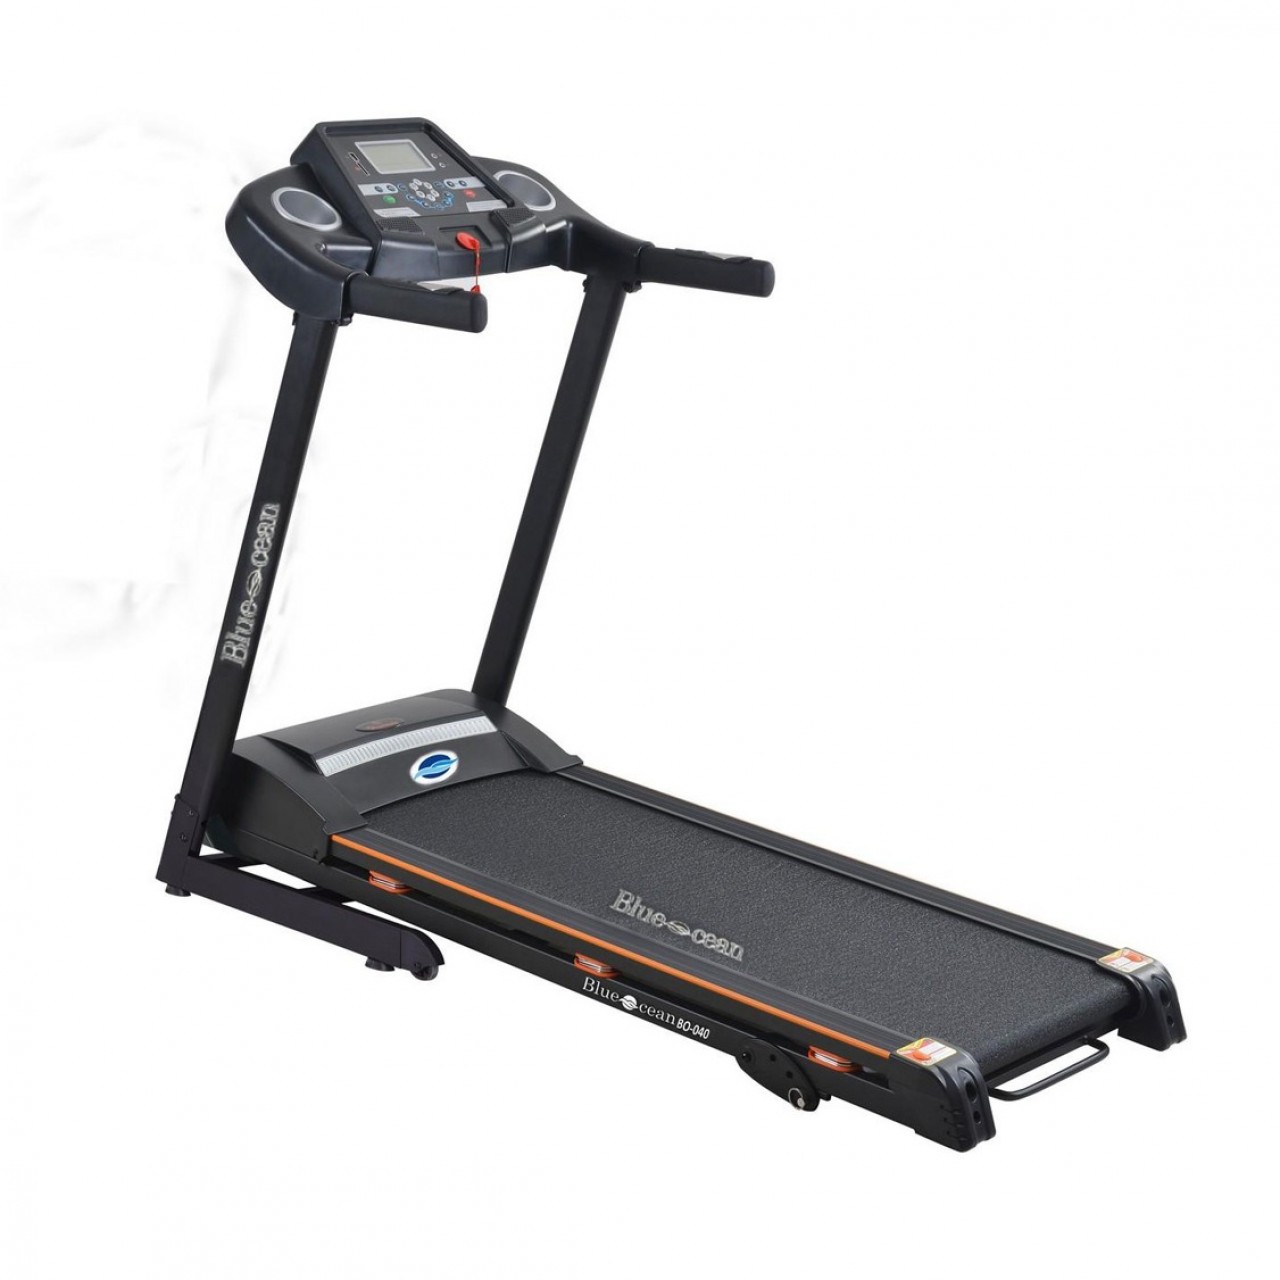 Blue Ocean Treadmill BO-040 - Holds Weight Up to 115kg